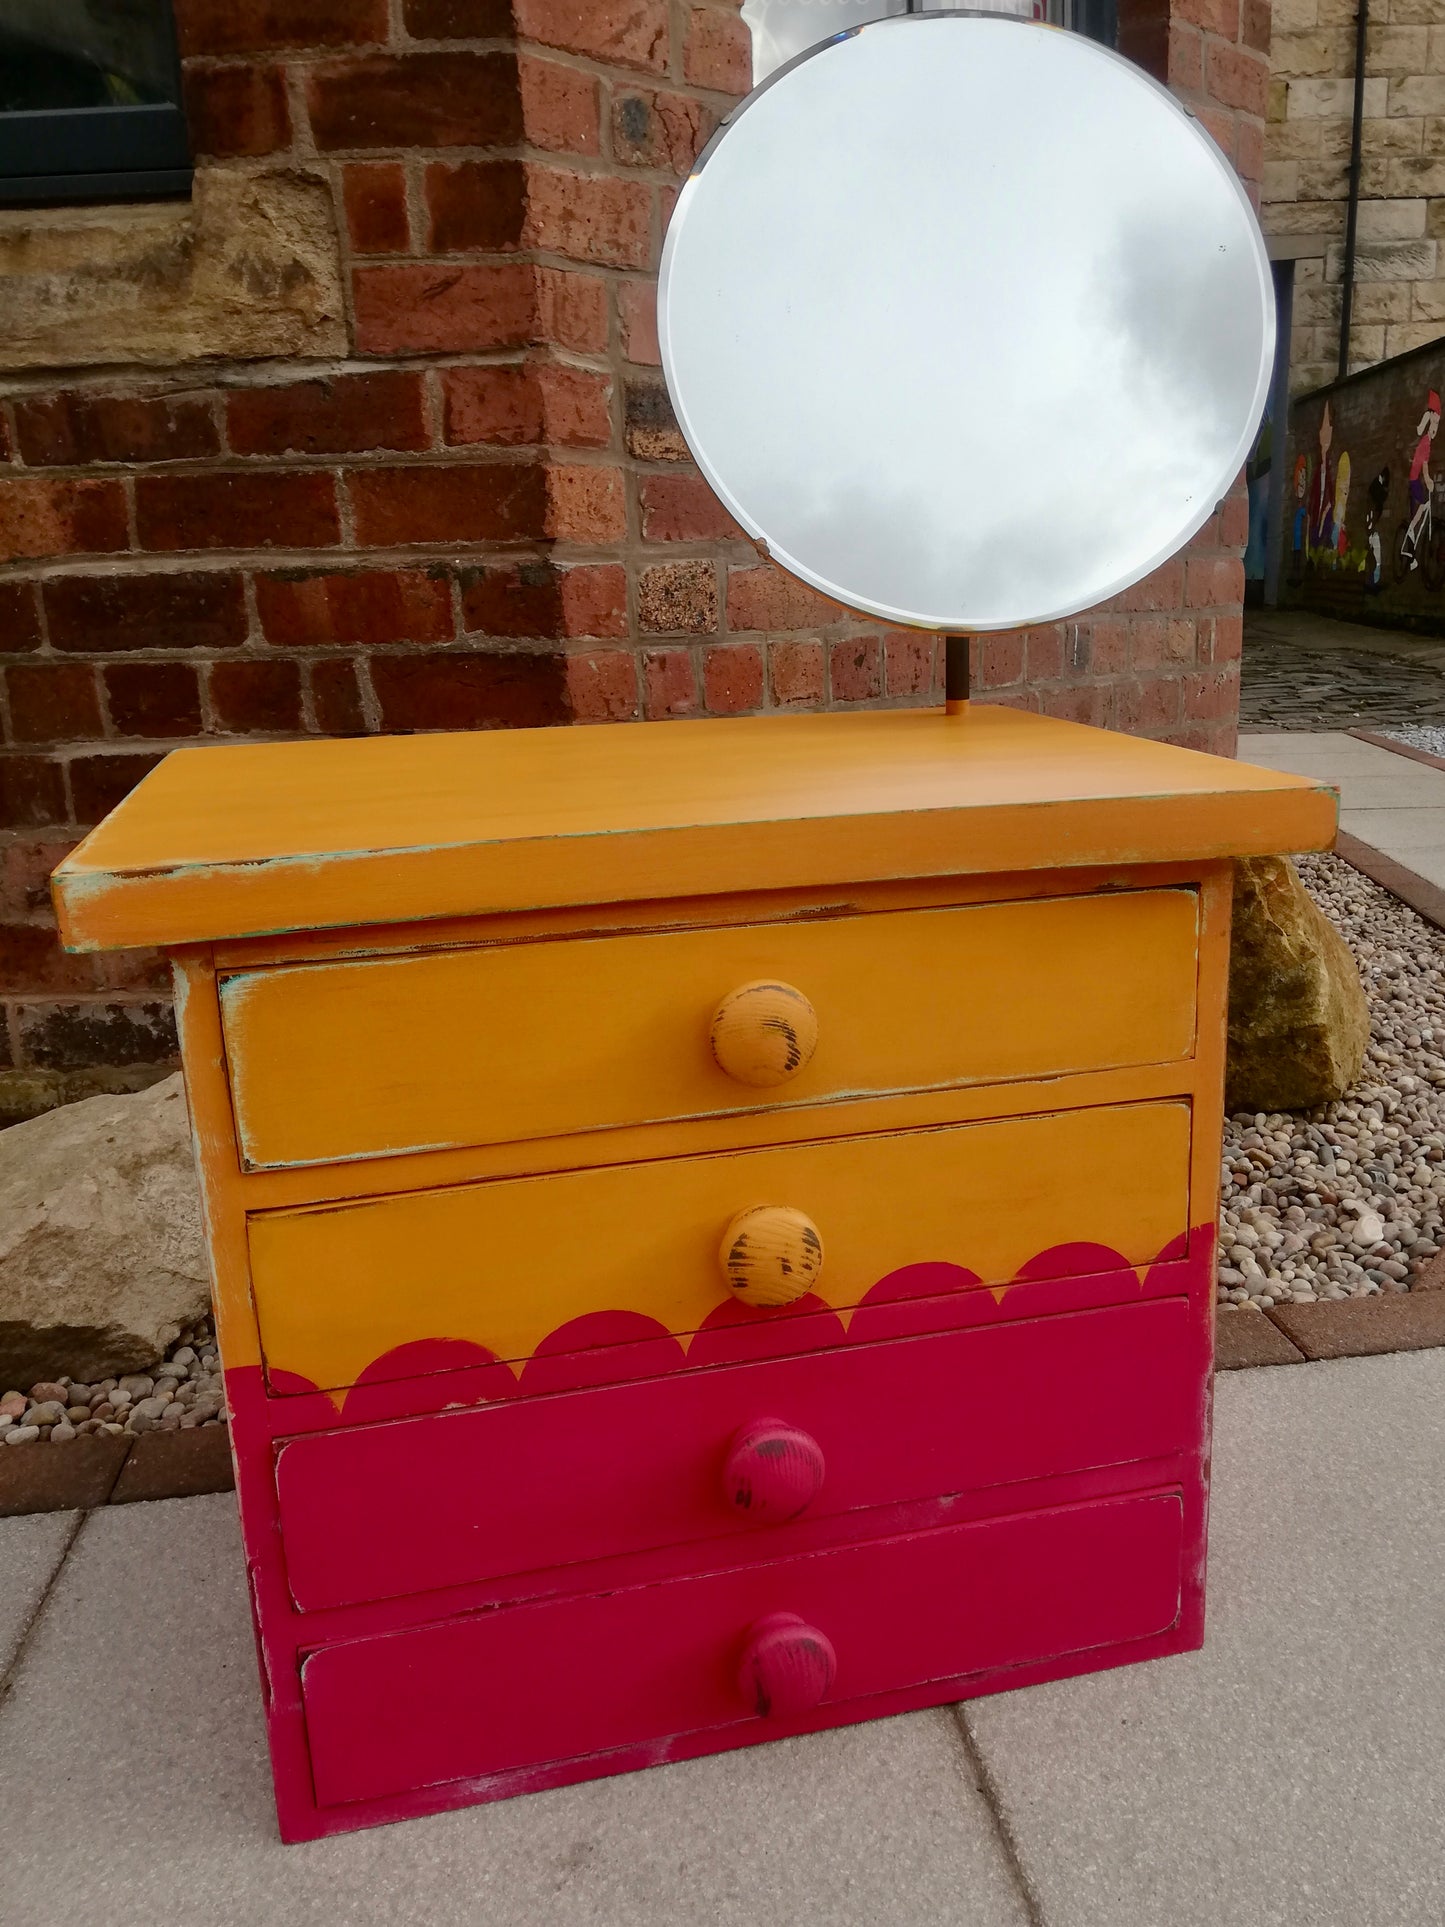 Painted to order - Vintage furniture with scallop design